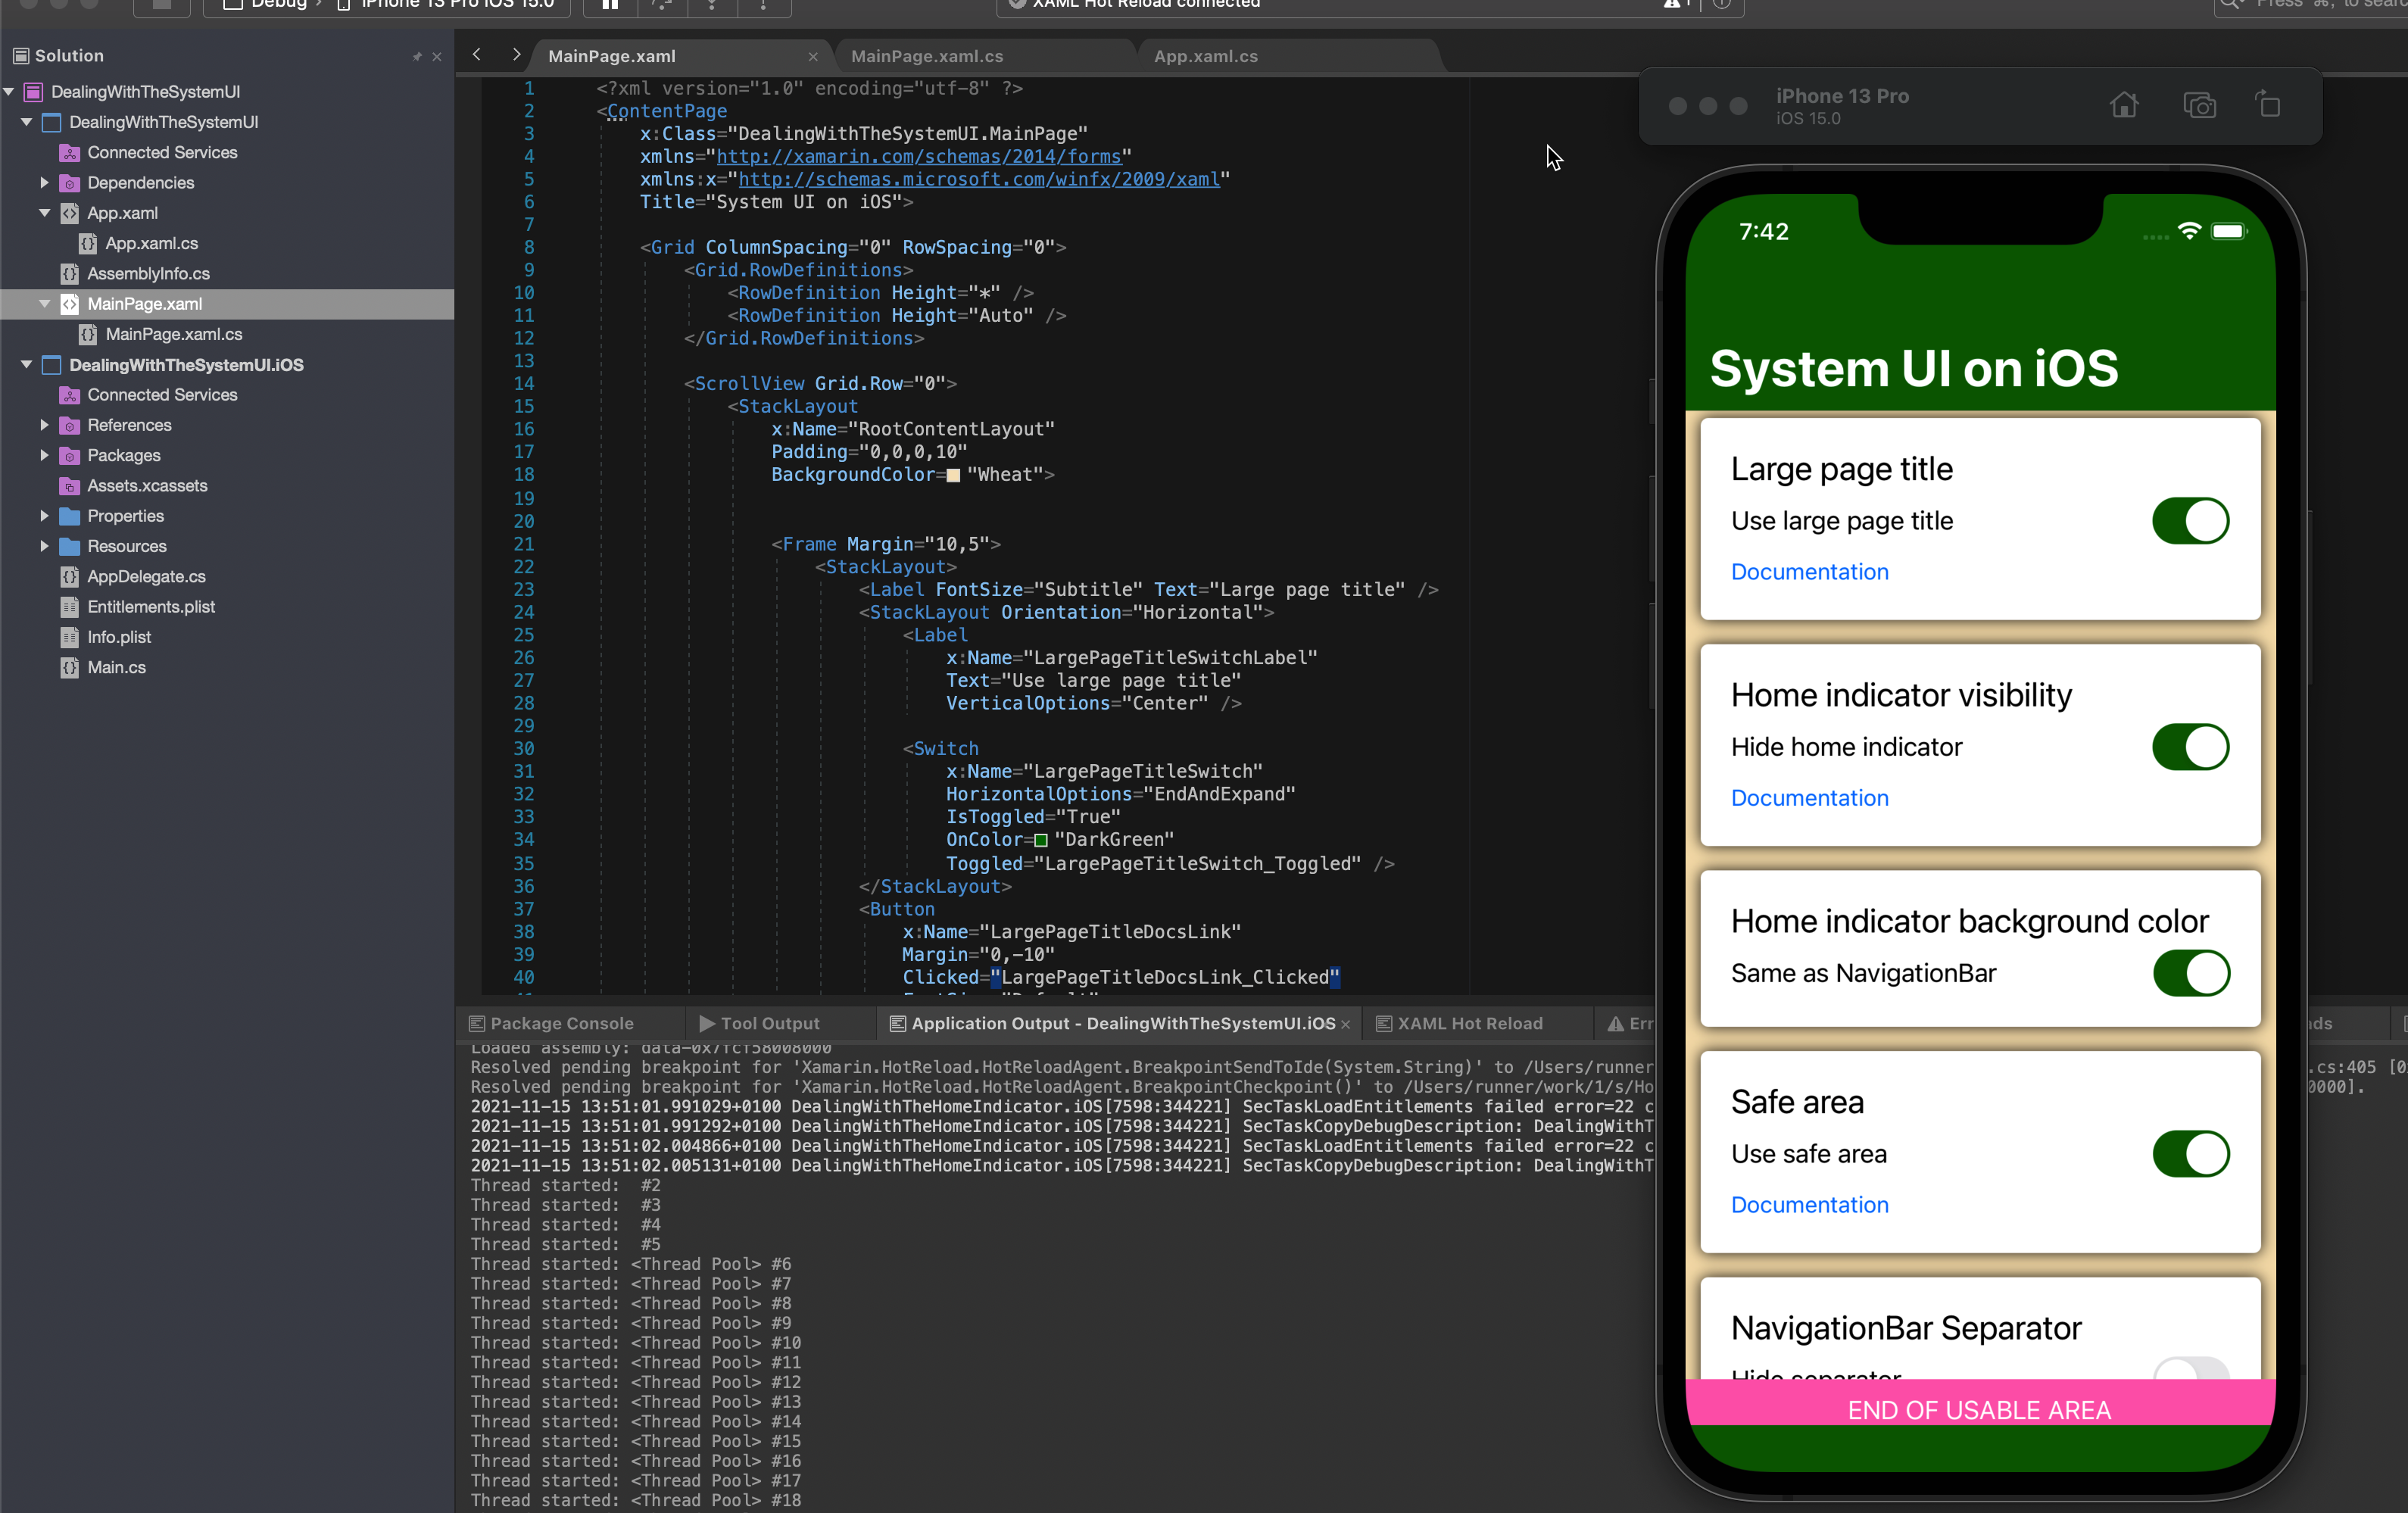 Dealing with the System UI on iOS in Xamarin.Forms